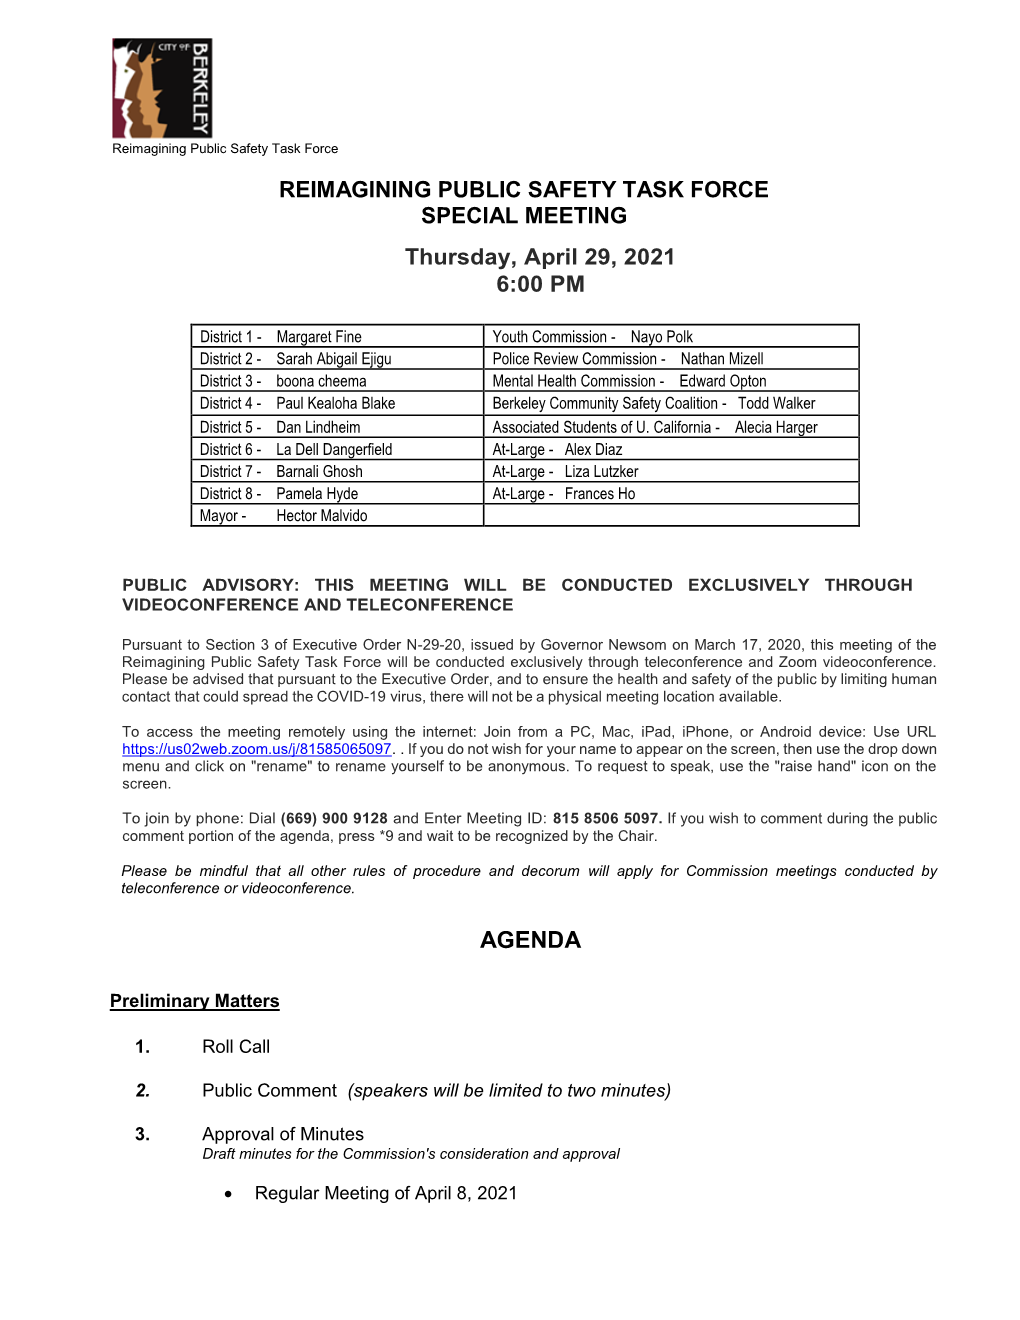 REIMAGINING PUBLIC SAFETY TASK FORCE SPECIAL MEETING Thursday, April 29, 2021 6:00 PM